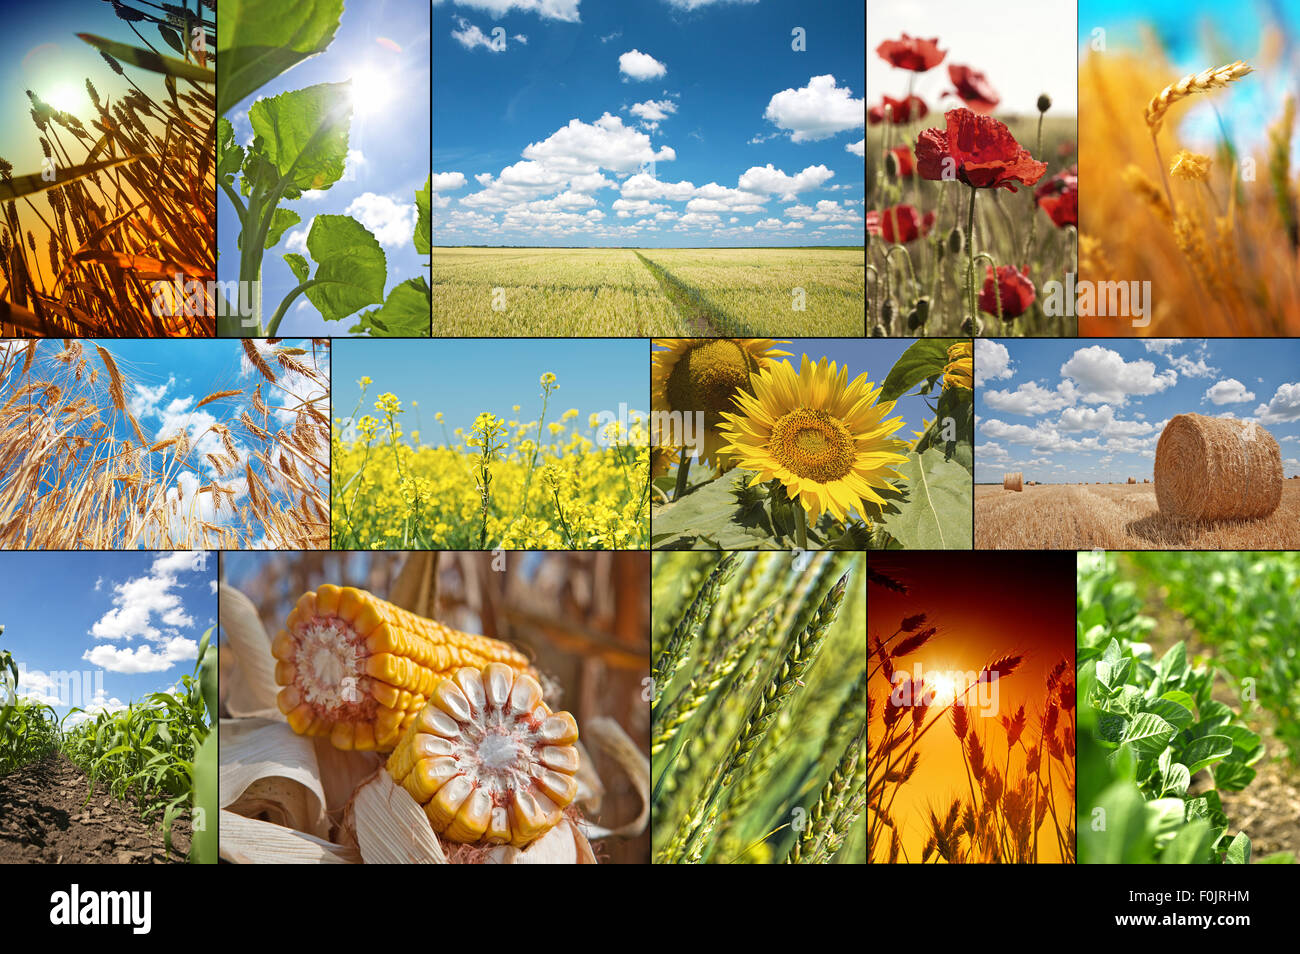 Collage with pictures about agriculture Stock Photo